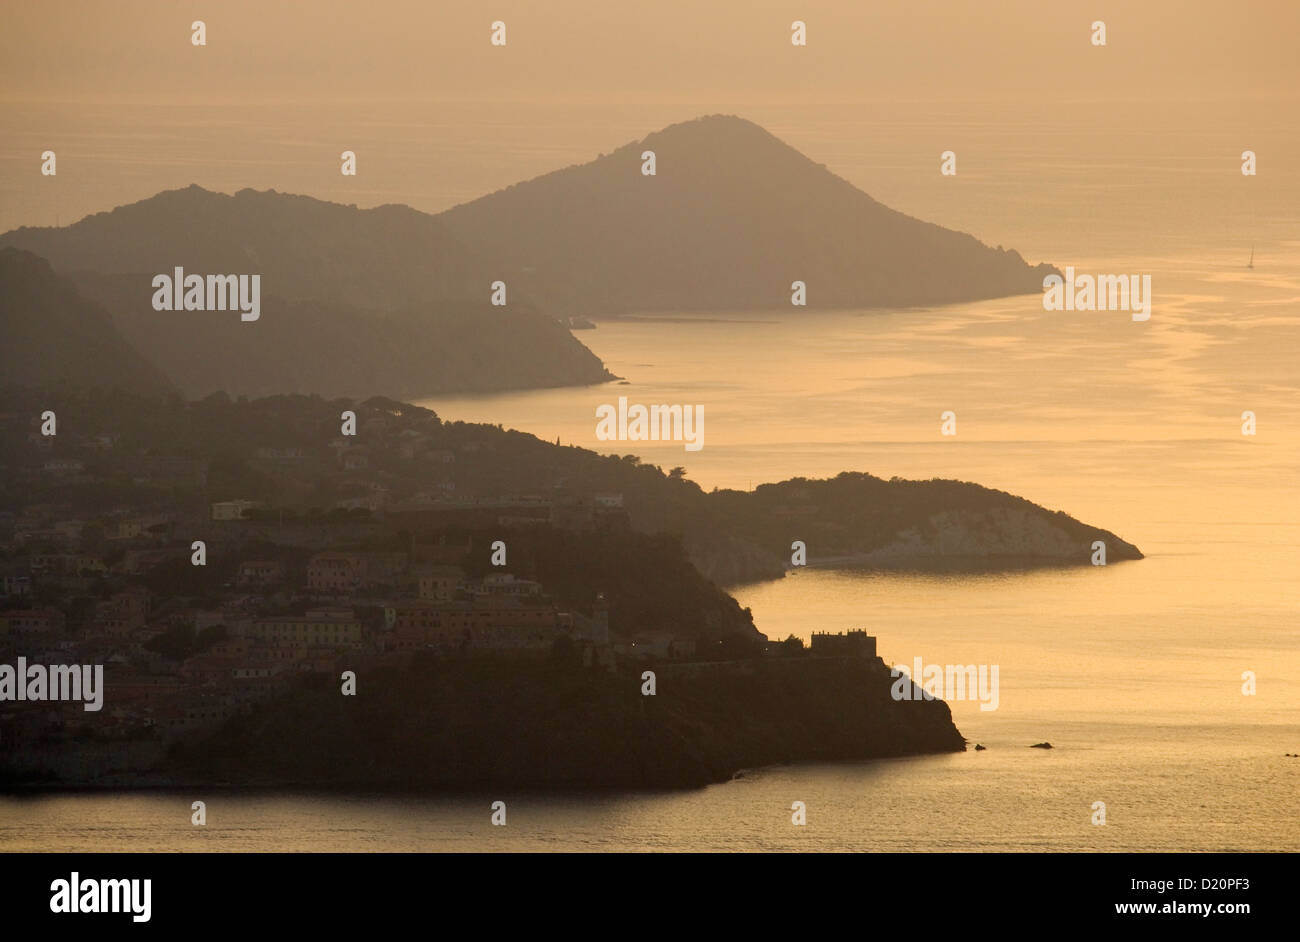 View over the nothern coast at sunset, Elba, Tuscany, Italy, Europe Stock Photo